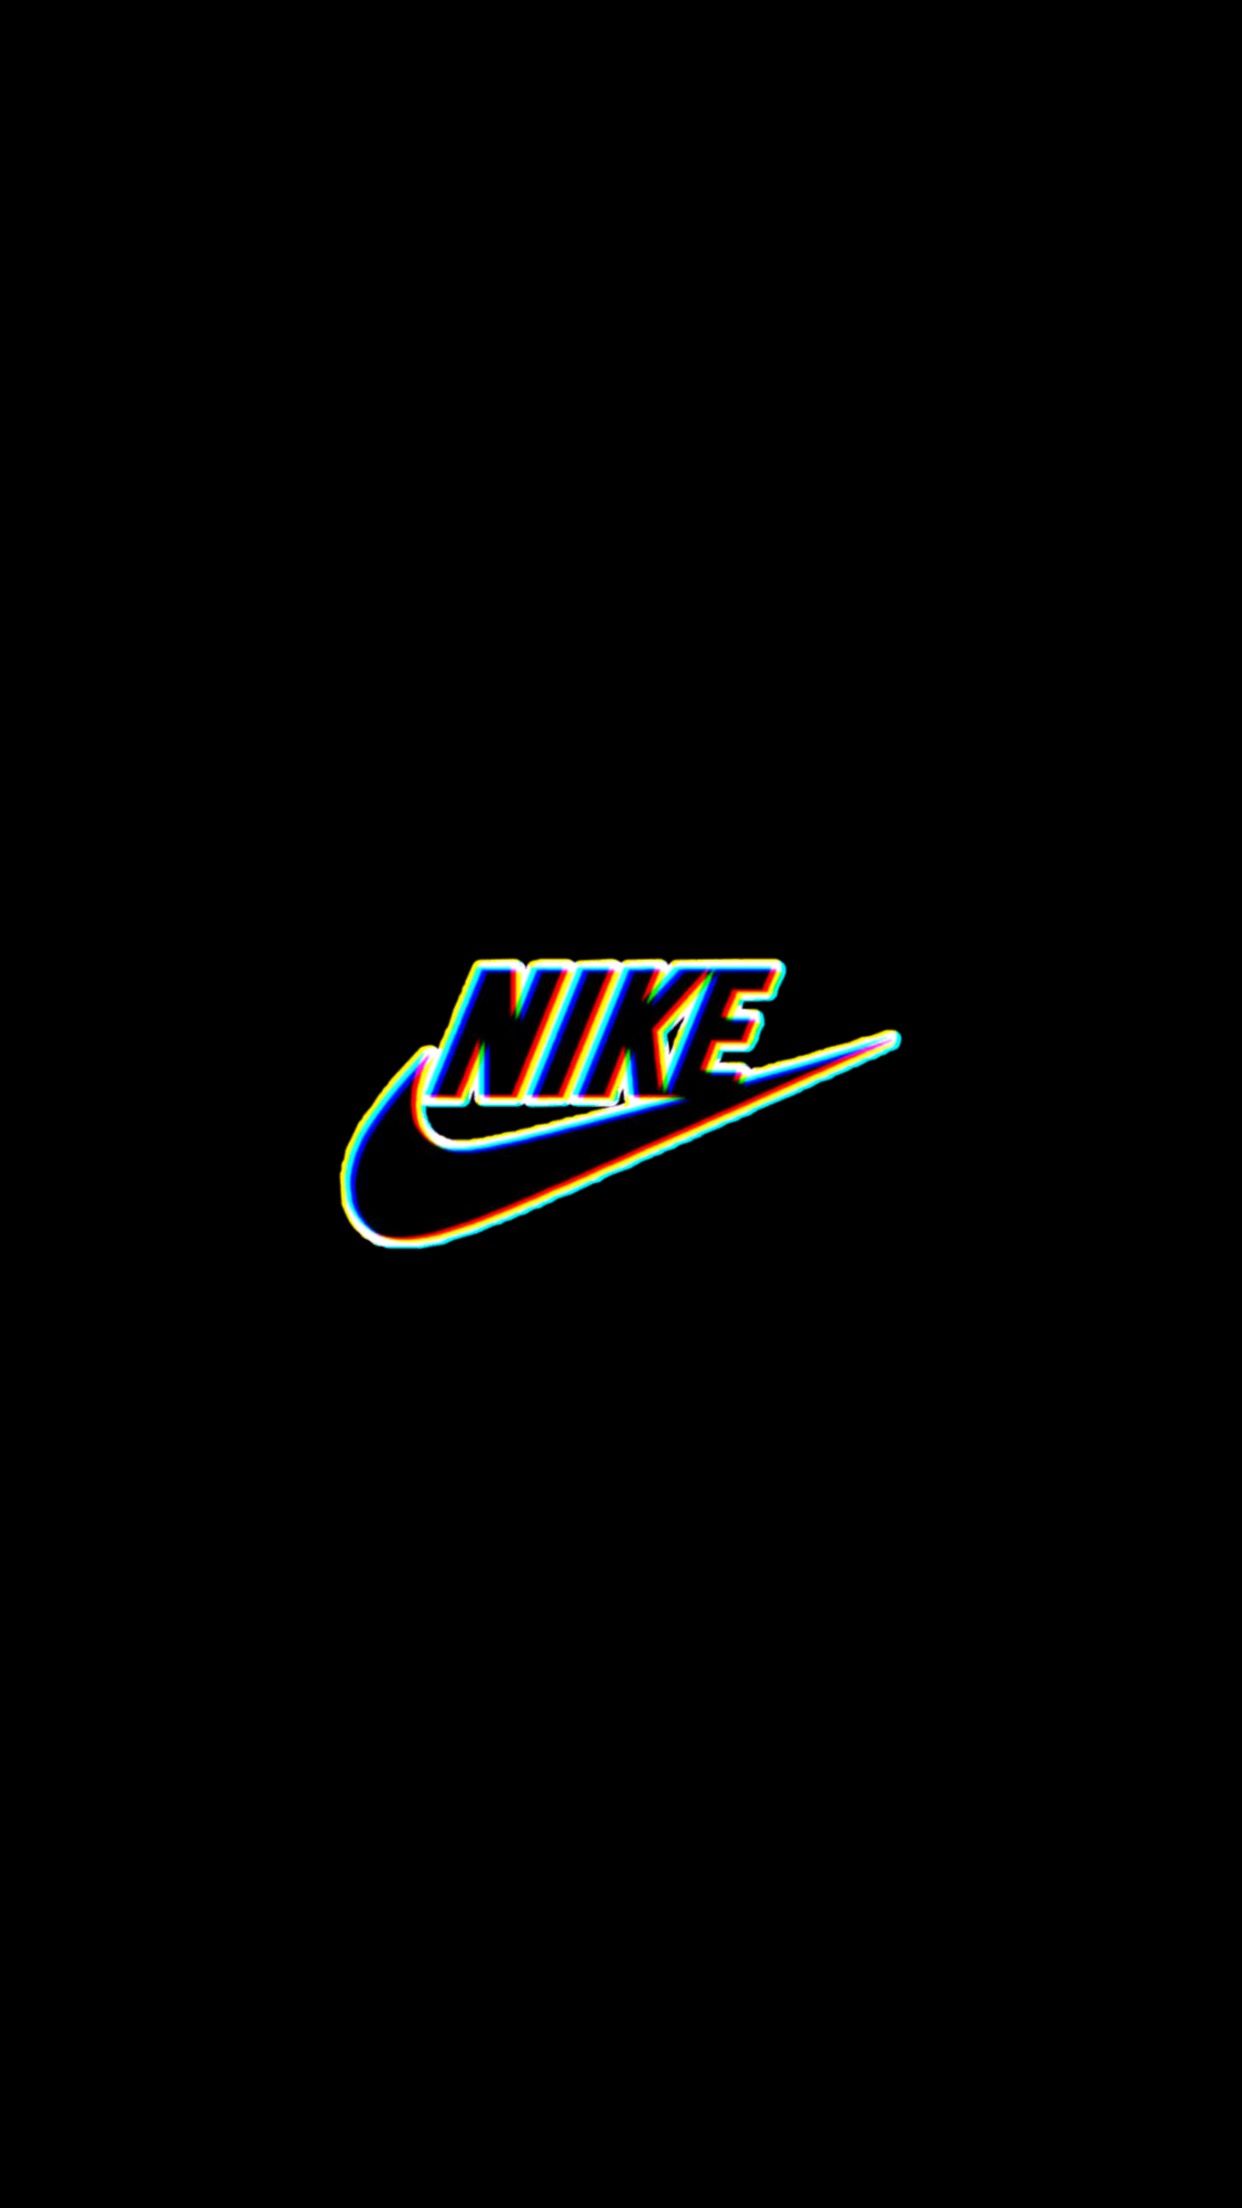 Nike background aesthetic wallpaper aesthetic background glitch